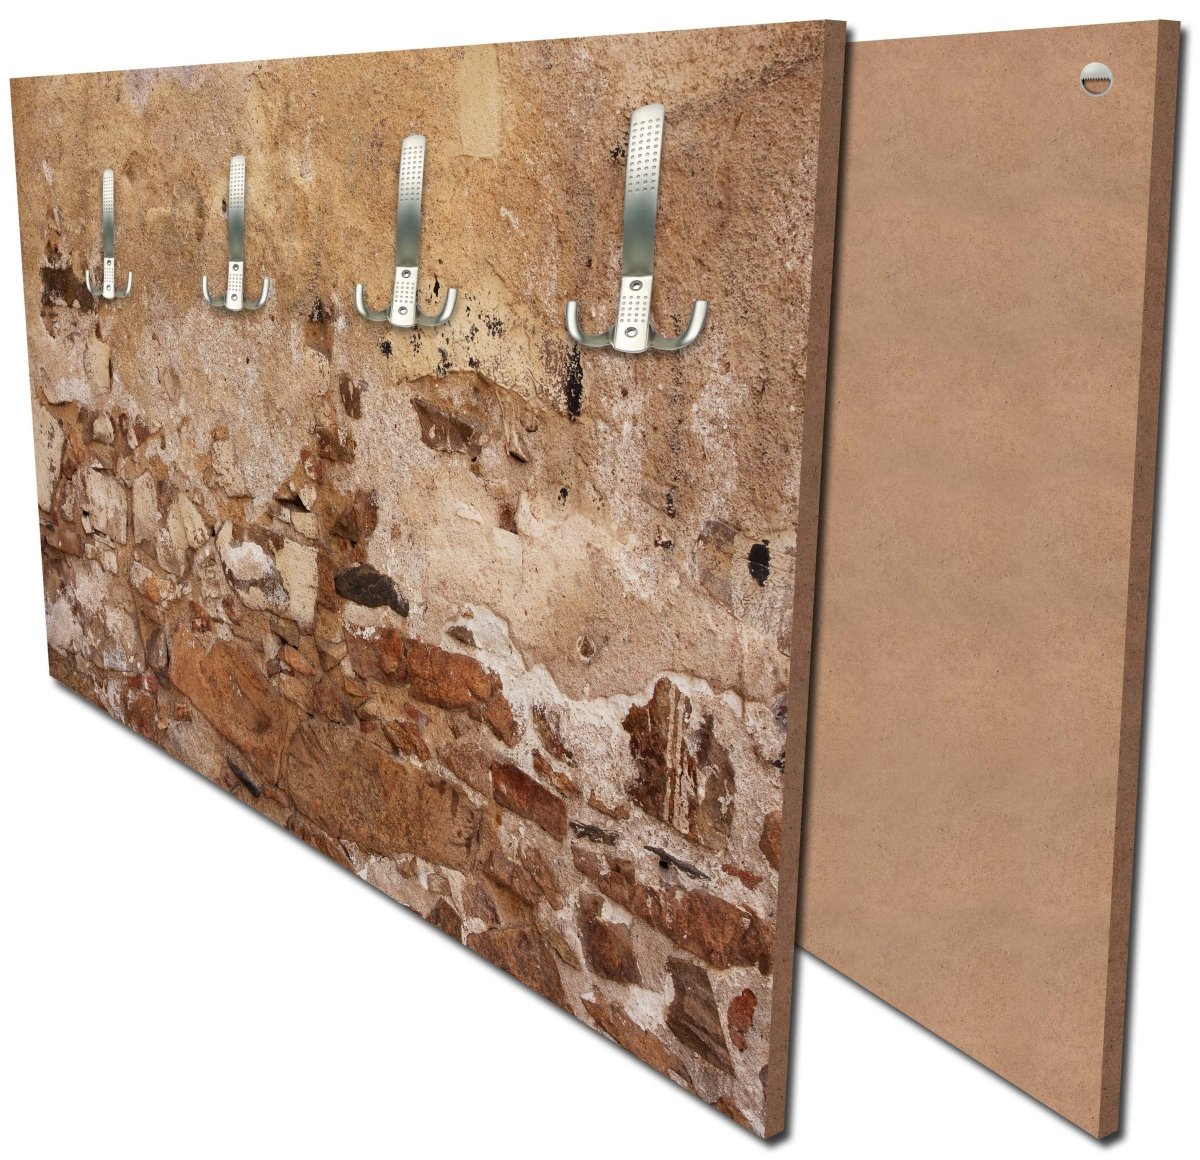 Cloakroom Old Wall, built of stone and stucco M1051